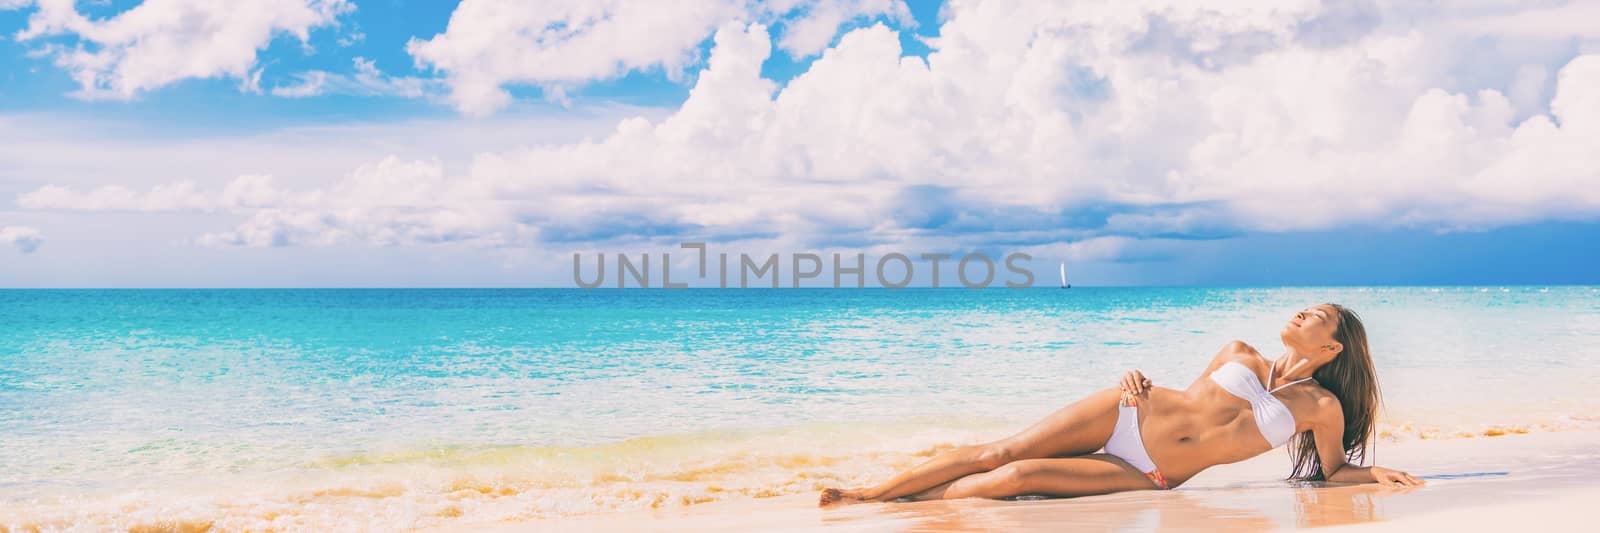 Beach paradise sexy bikini woman lying down on sand relaxing sun tanning in tropical caribbean travel destination for summer vacation. Panoramic banner landscape with copy space on blue ocean by Maridav